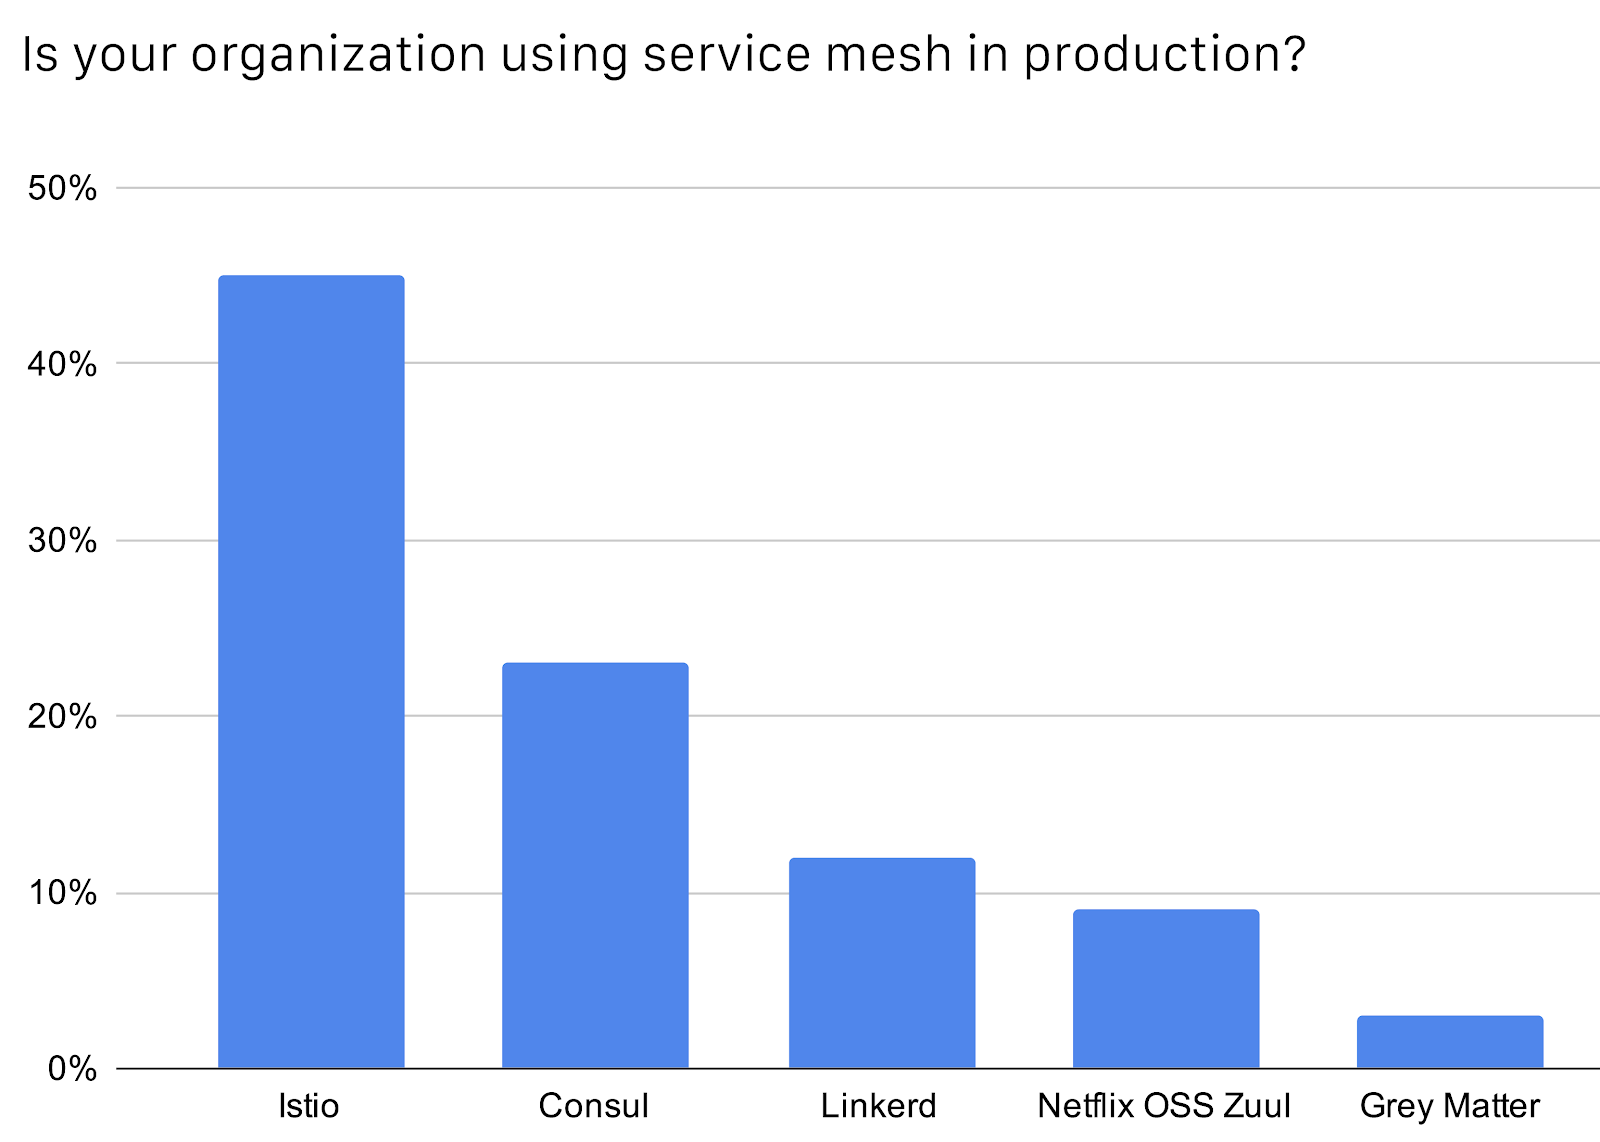 Bar chart shows percentage of organization using service mesh in production